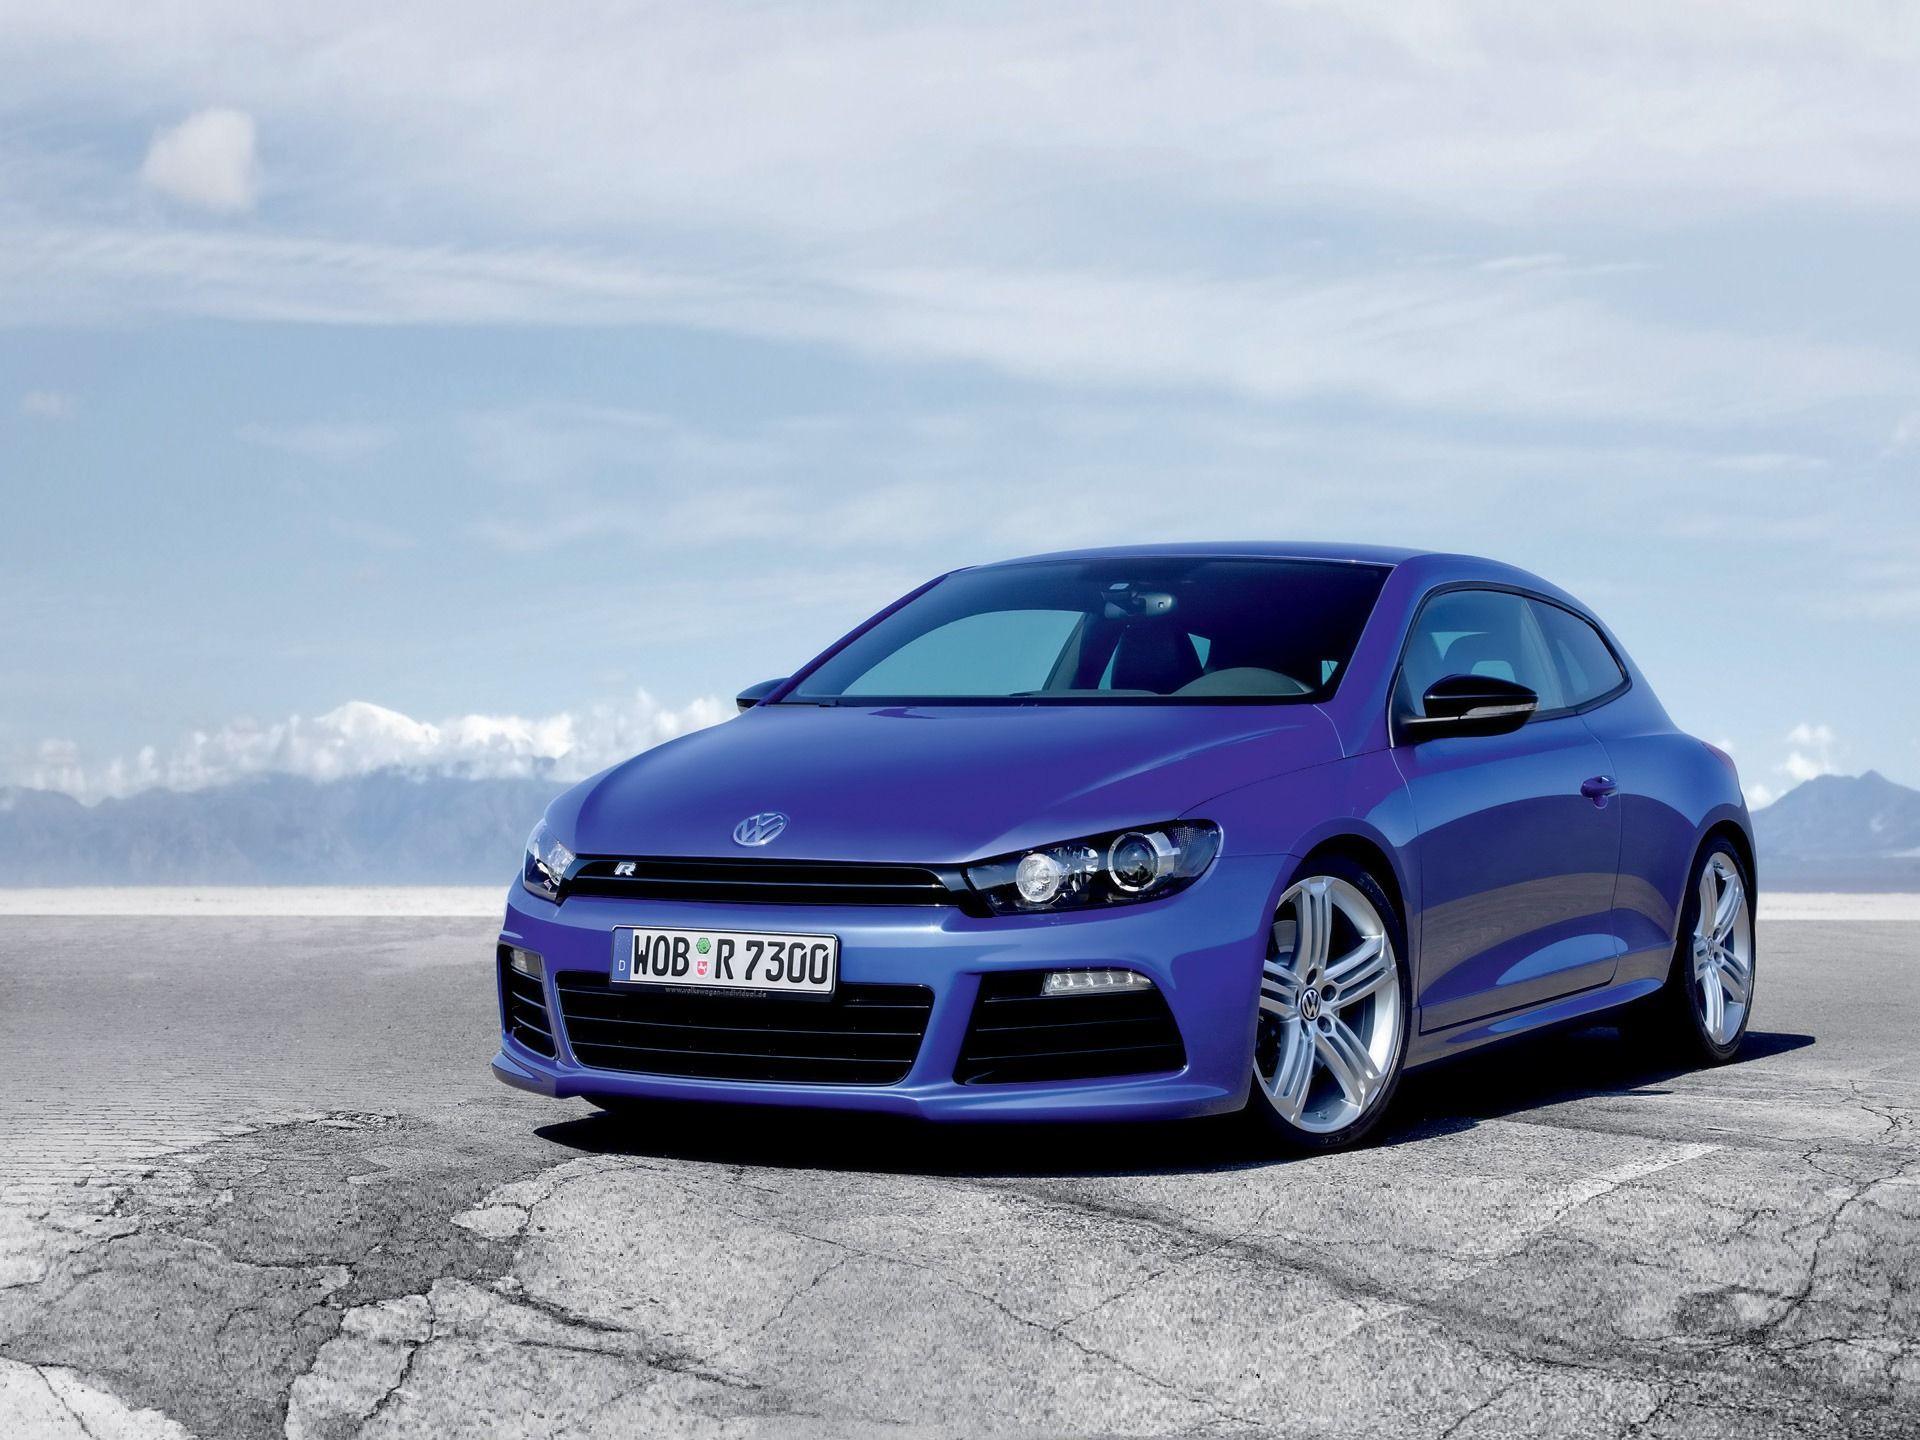 Volkswagen scirocco wallpaper for free download about 20